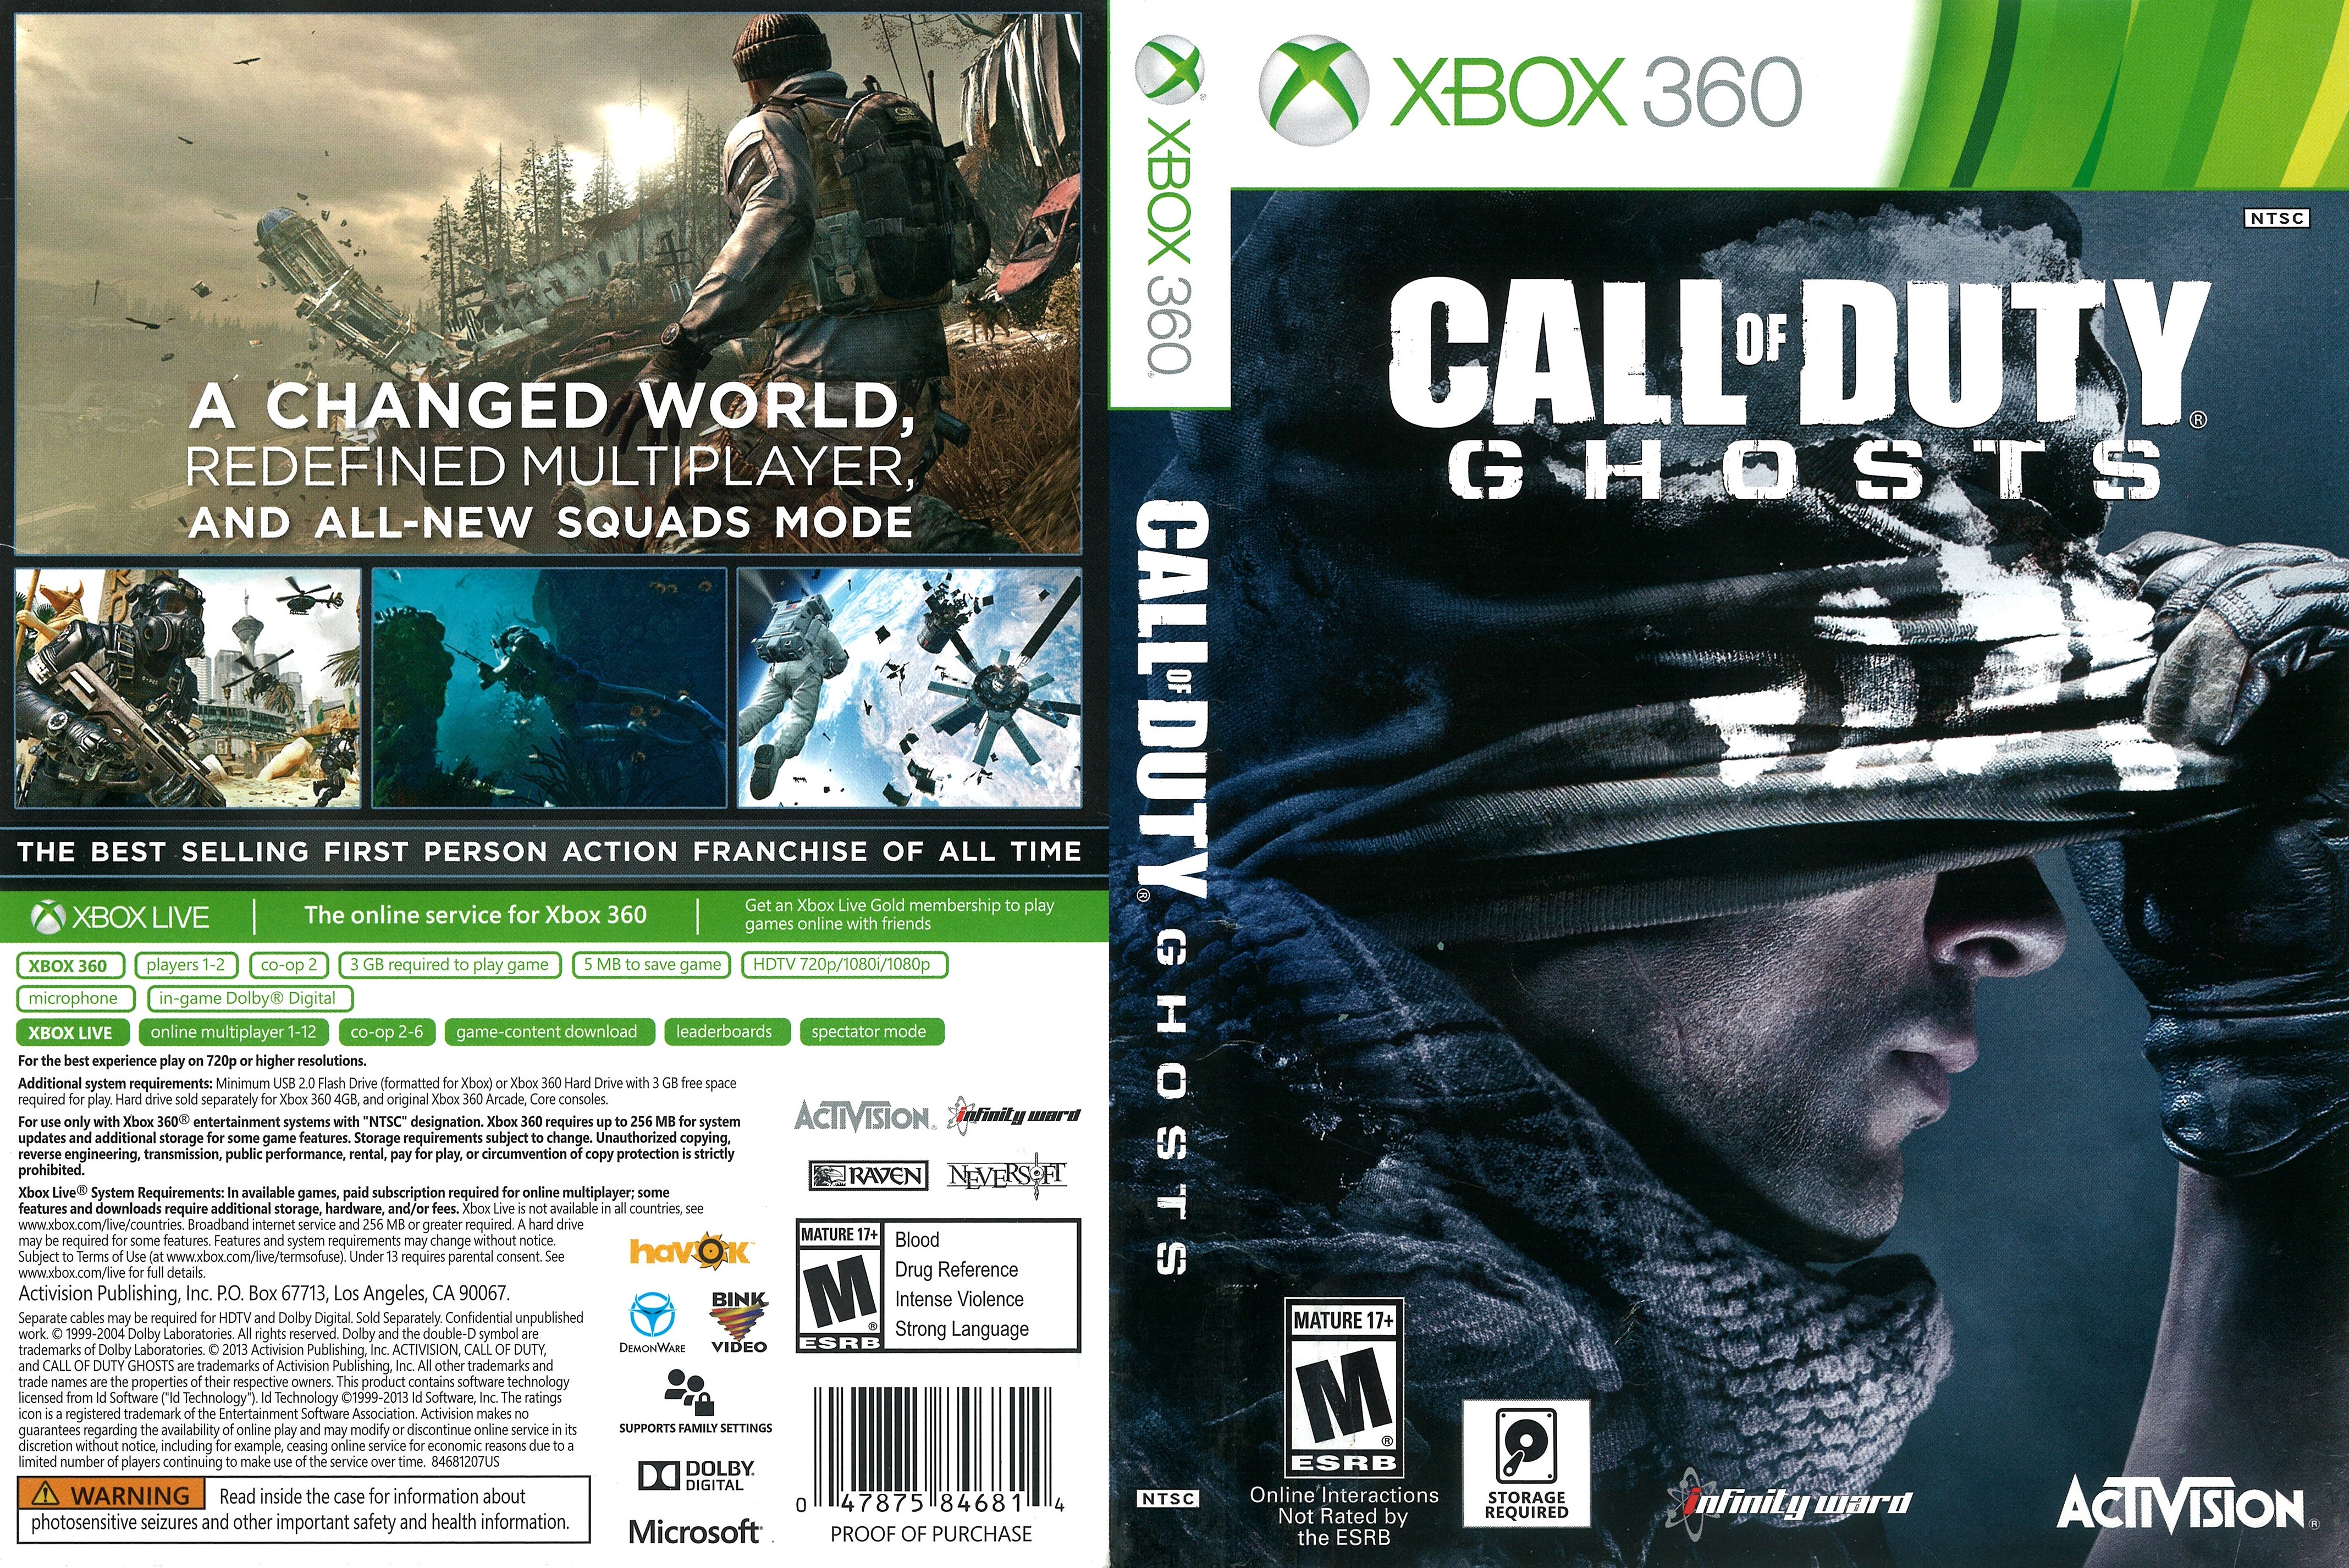 Xbox 360 игры 2024. Call of Duty Ghosts Xbox 360 обложка. Call of Duty 3 Xbox 360 диск. Call of Duty диск на иксбокс 360. Call of Duty диск на Xbox 360.